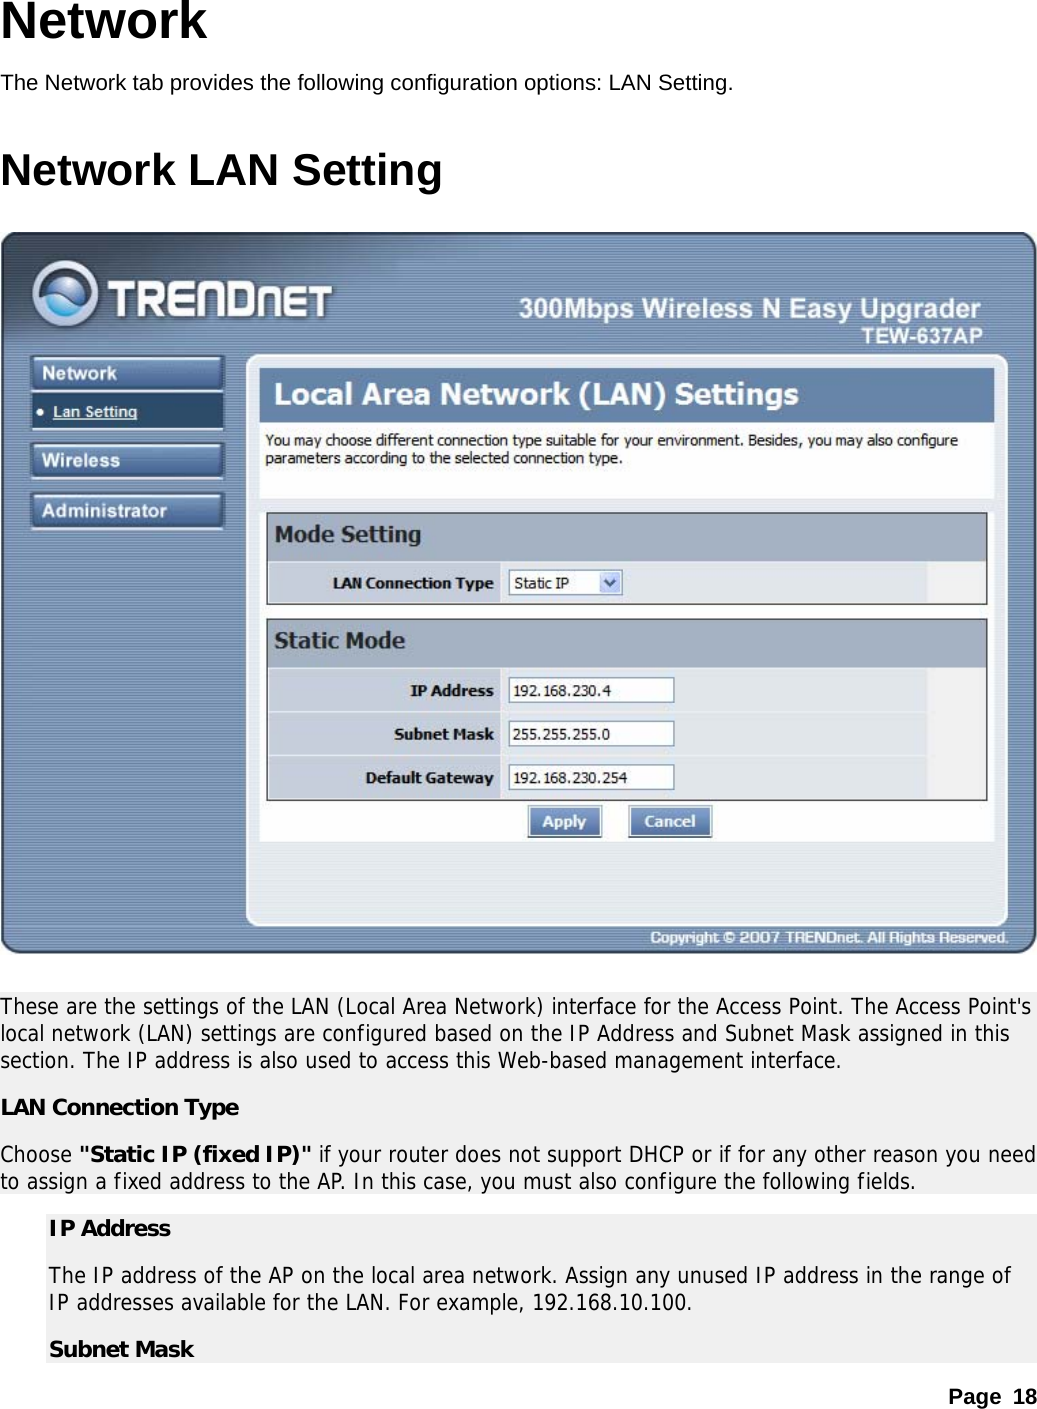 Page 18 Network The Network tab provides the following configuration options: LAN Setting.    Network LAN Setting    These are the settings of the LAN (Local Area Network) interface for the Access Point. The Access Point&apos;s local network (LAN) settings are configured based on the IP Address and Subnet Mask assigned in this section. The IP address is also used to access this Web-based management interface.  LAN Connection Type Choose &quot;Static IP (fixed IP)&quot; if your router does not support DHCP or if for any other reason you need to assign a fixed address to the AP. In this case, you must also configure the following fields.  IP Address   The IP address of the AP on the local area network. Assign any unused IP address in the range of IP addresses available for the LAN. For example, 192.168.10.100.   Subnet Mask   